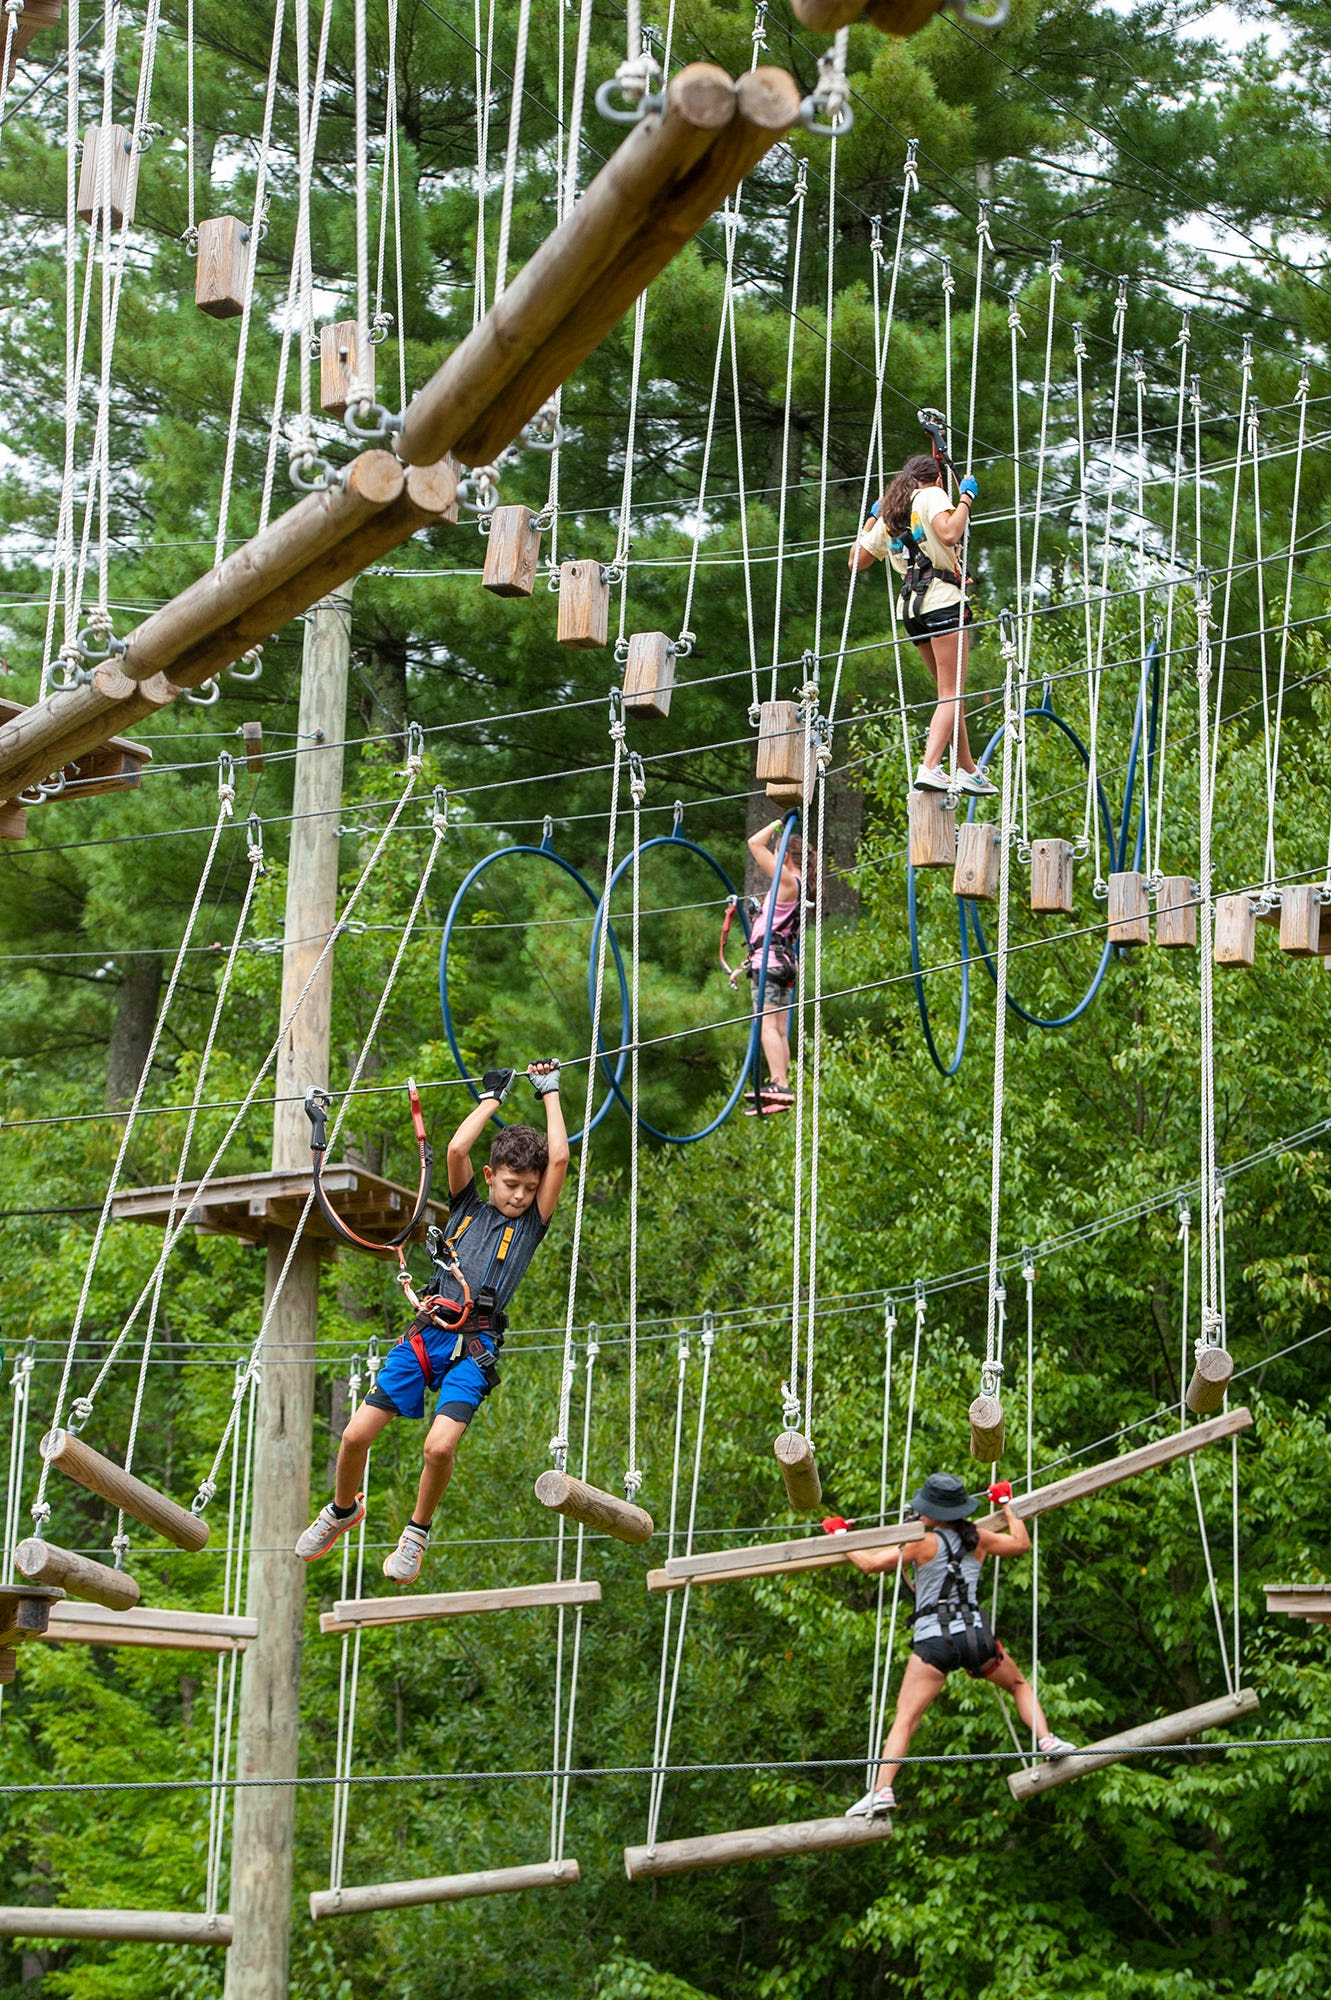 Greenville aerial adventure park voted in nation's top 10: Here's why it's so exciting